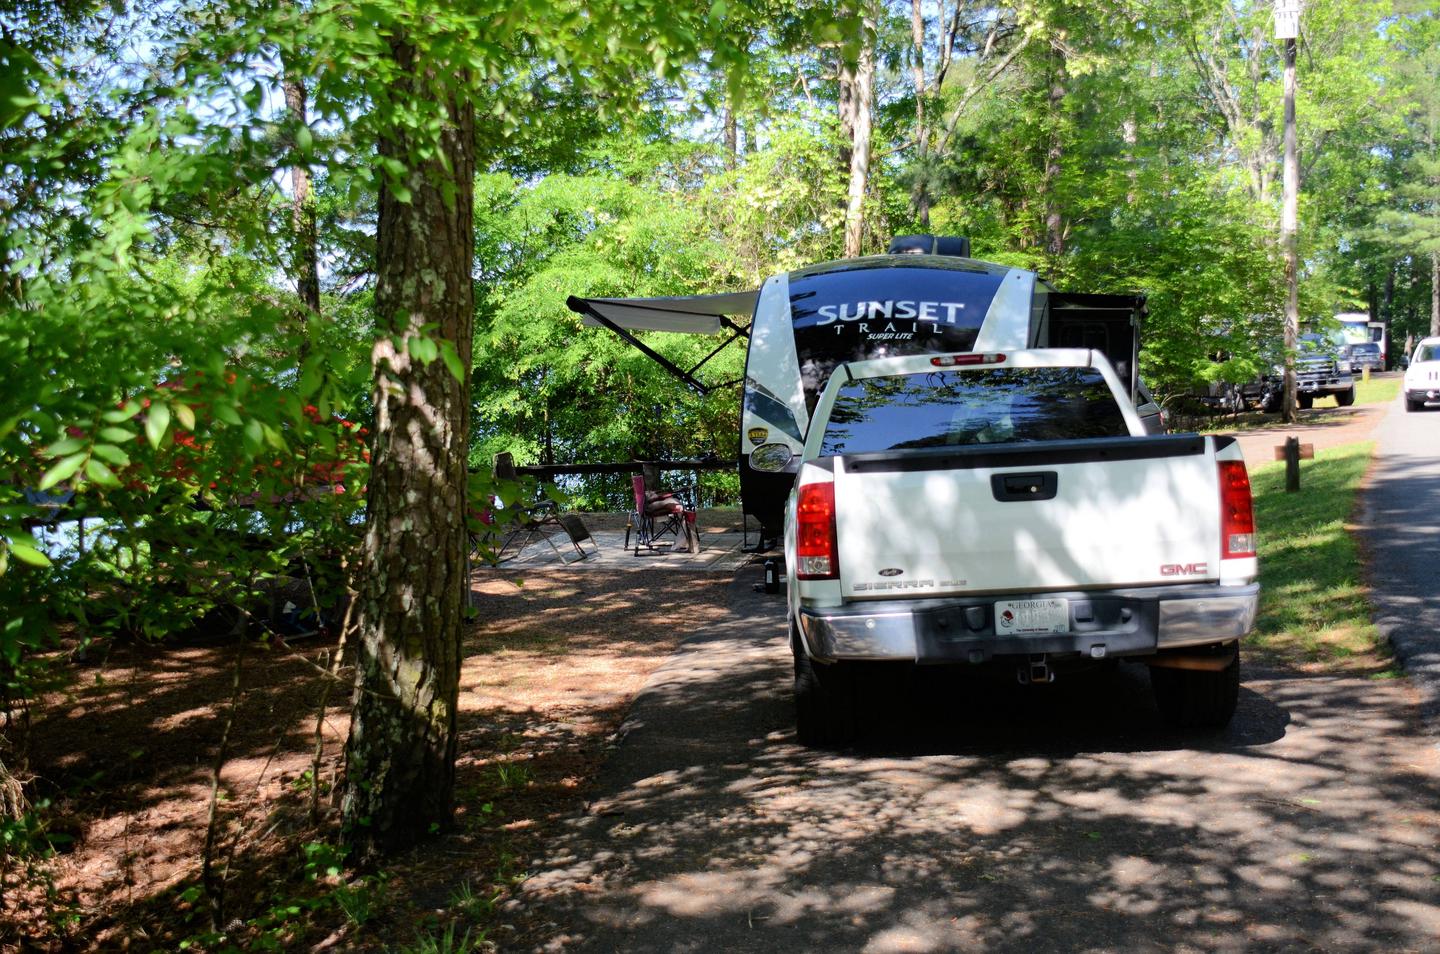 Pull-thru exit, driveway slope, awning-side clearance.McKinney Campground, campsite 48.